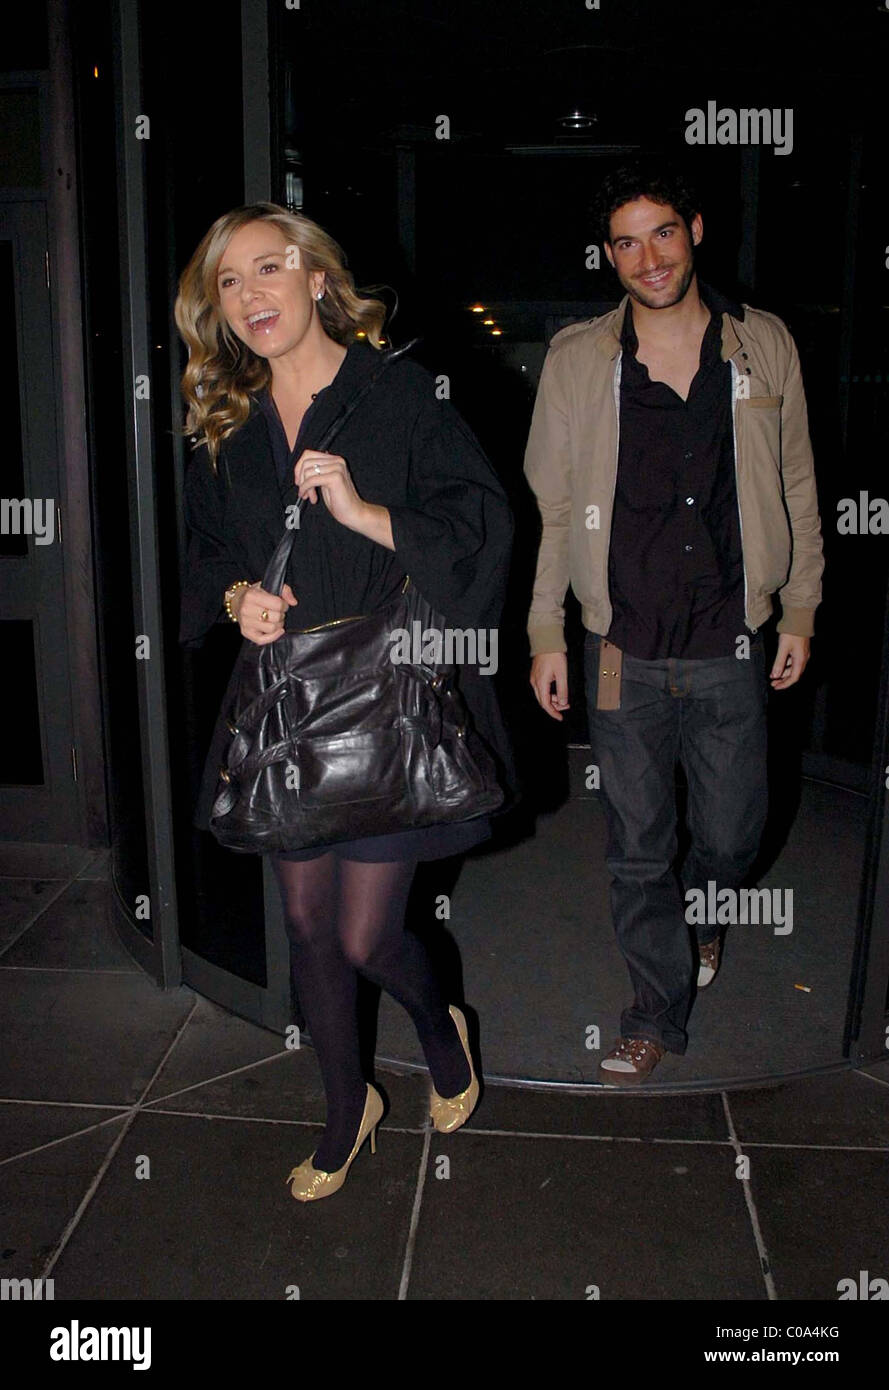 Tamzin Outhwaite, who is pregnant with her first child, leaving the RTE  studios with her boyfriend Tom Ellis Dublin, Ireland Stock Photo - Alamy